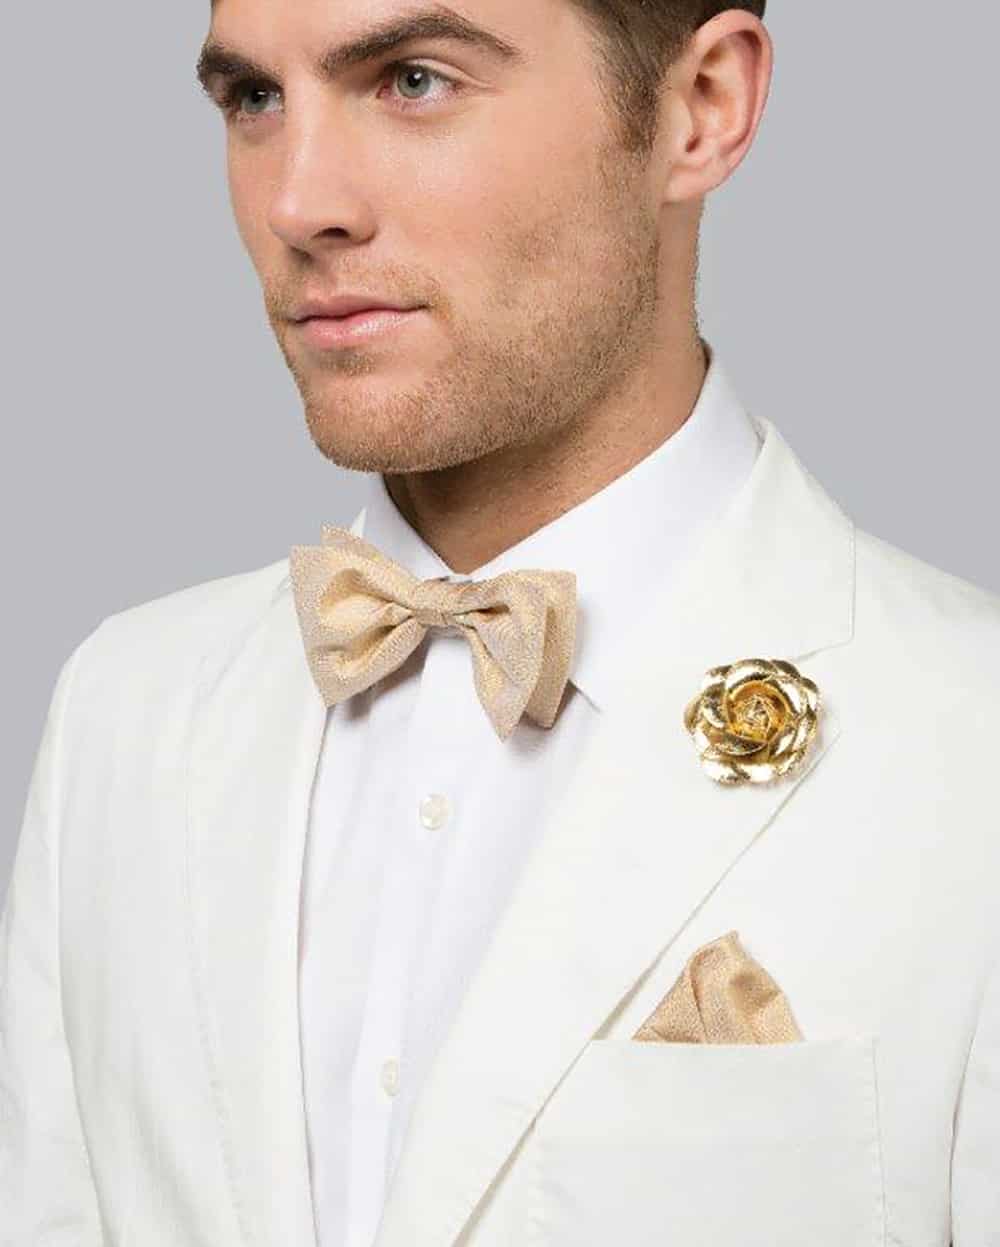 Groom wearing metallic bow-tie and lapel flower pin from Tony Barlow.